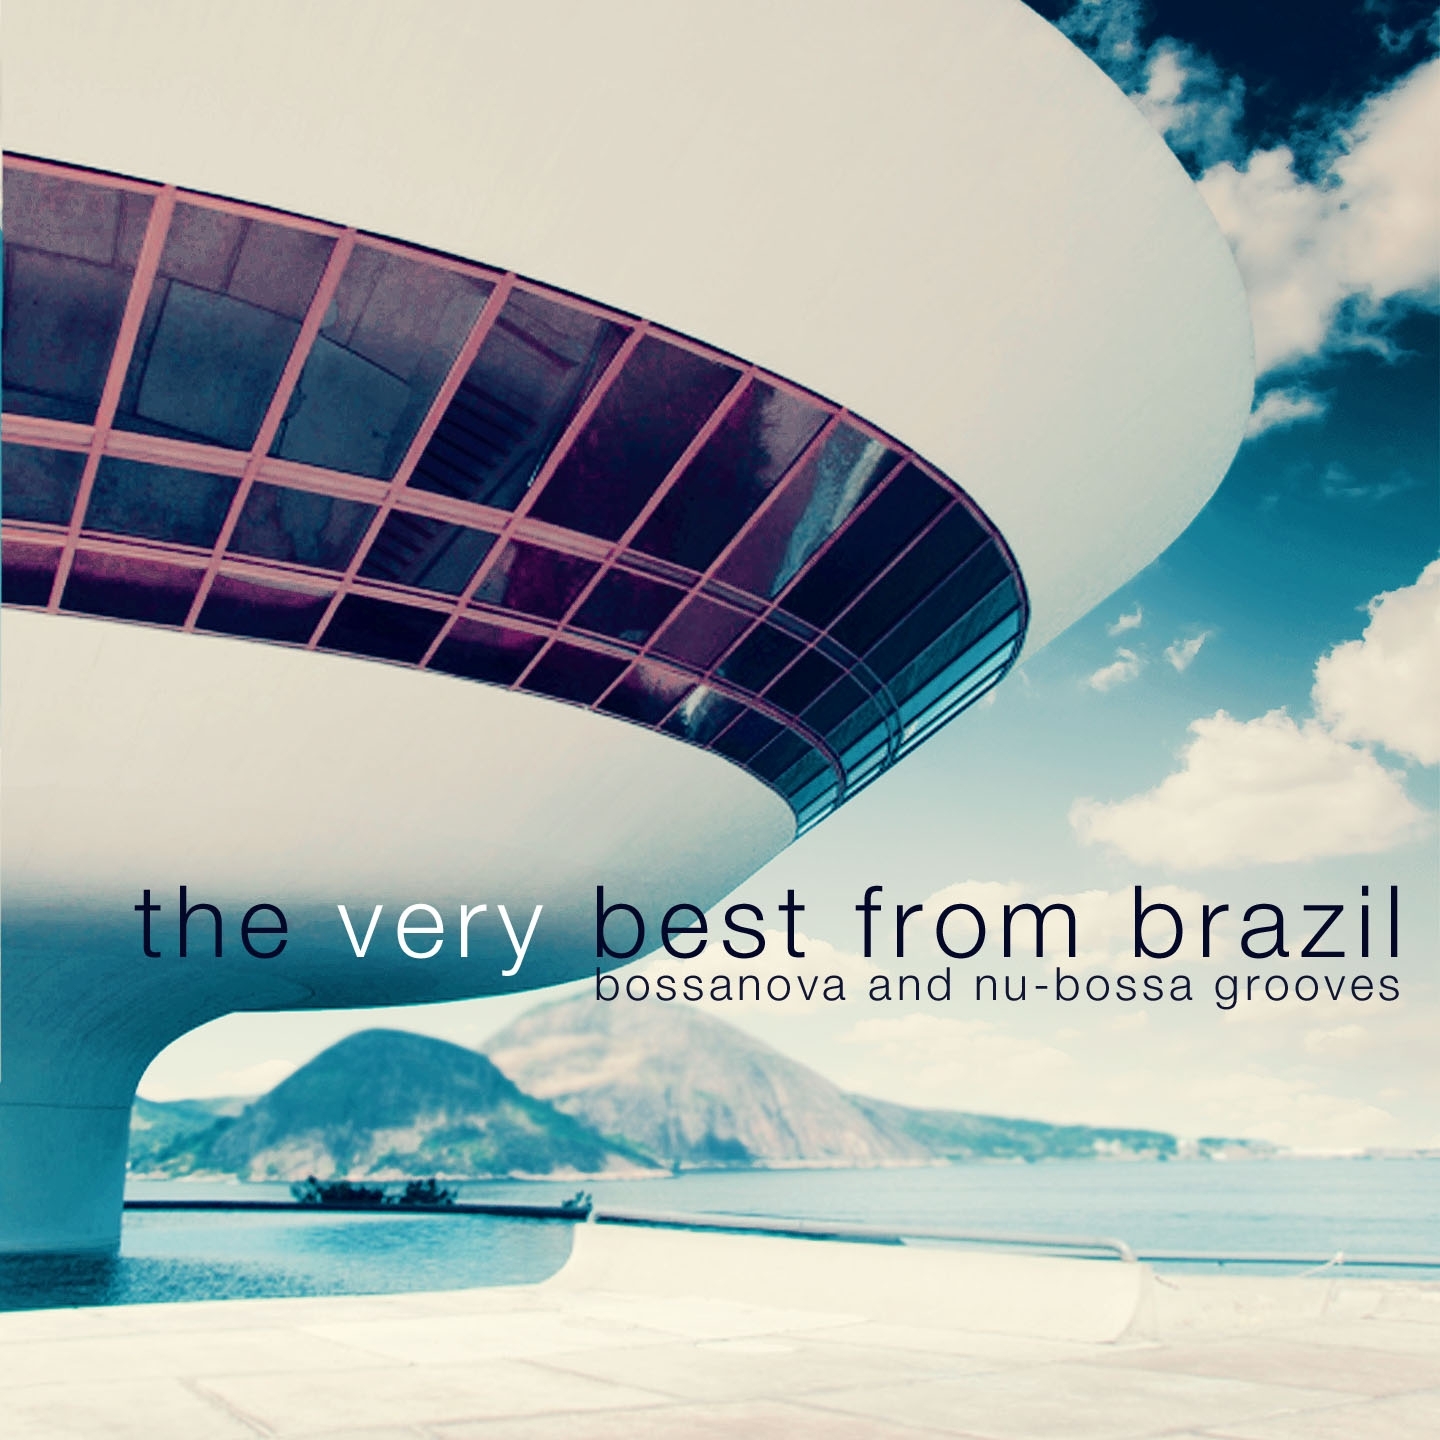 The Very Best from Brazil, Bossanova and Nu-Bossa Grooves